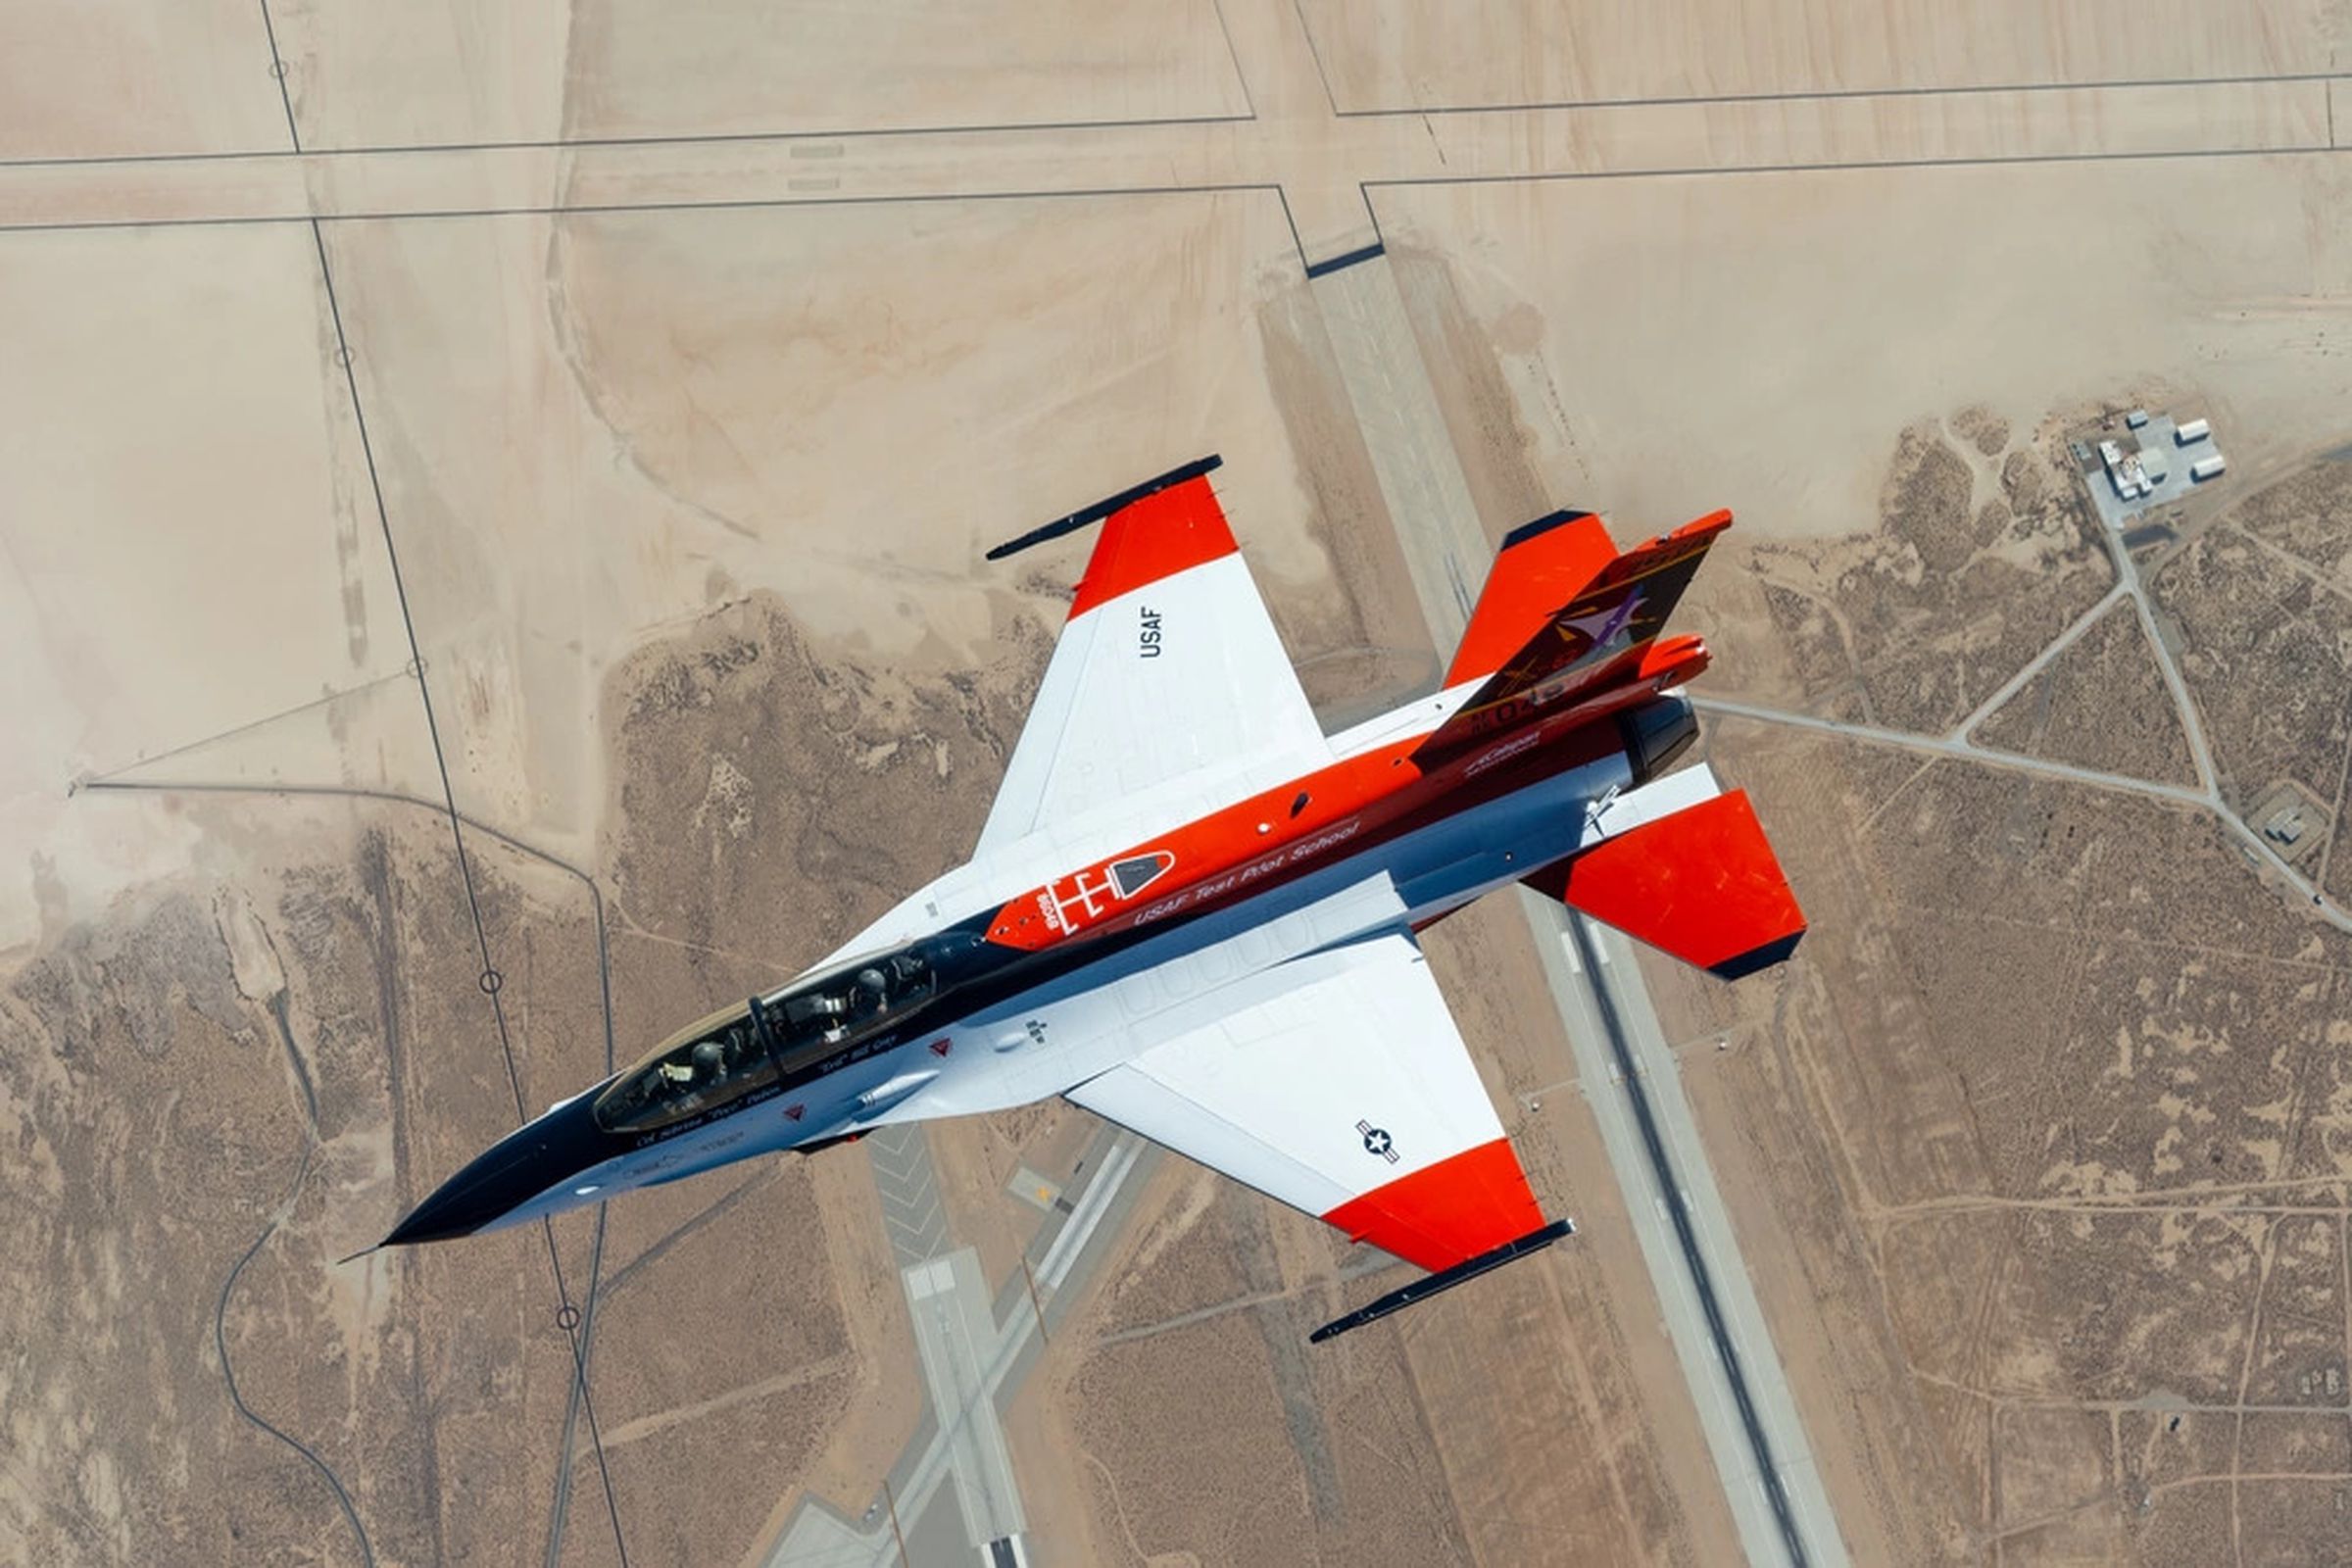 A photo showing a X-62A aircraft in flight